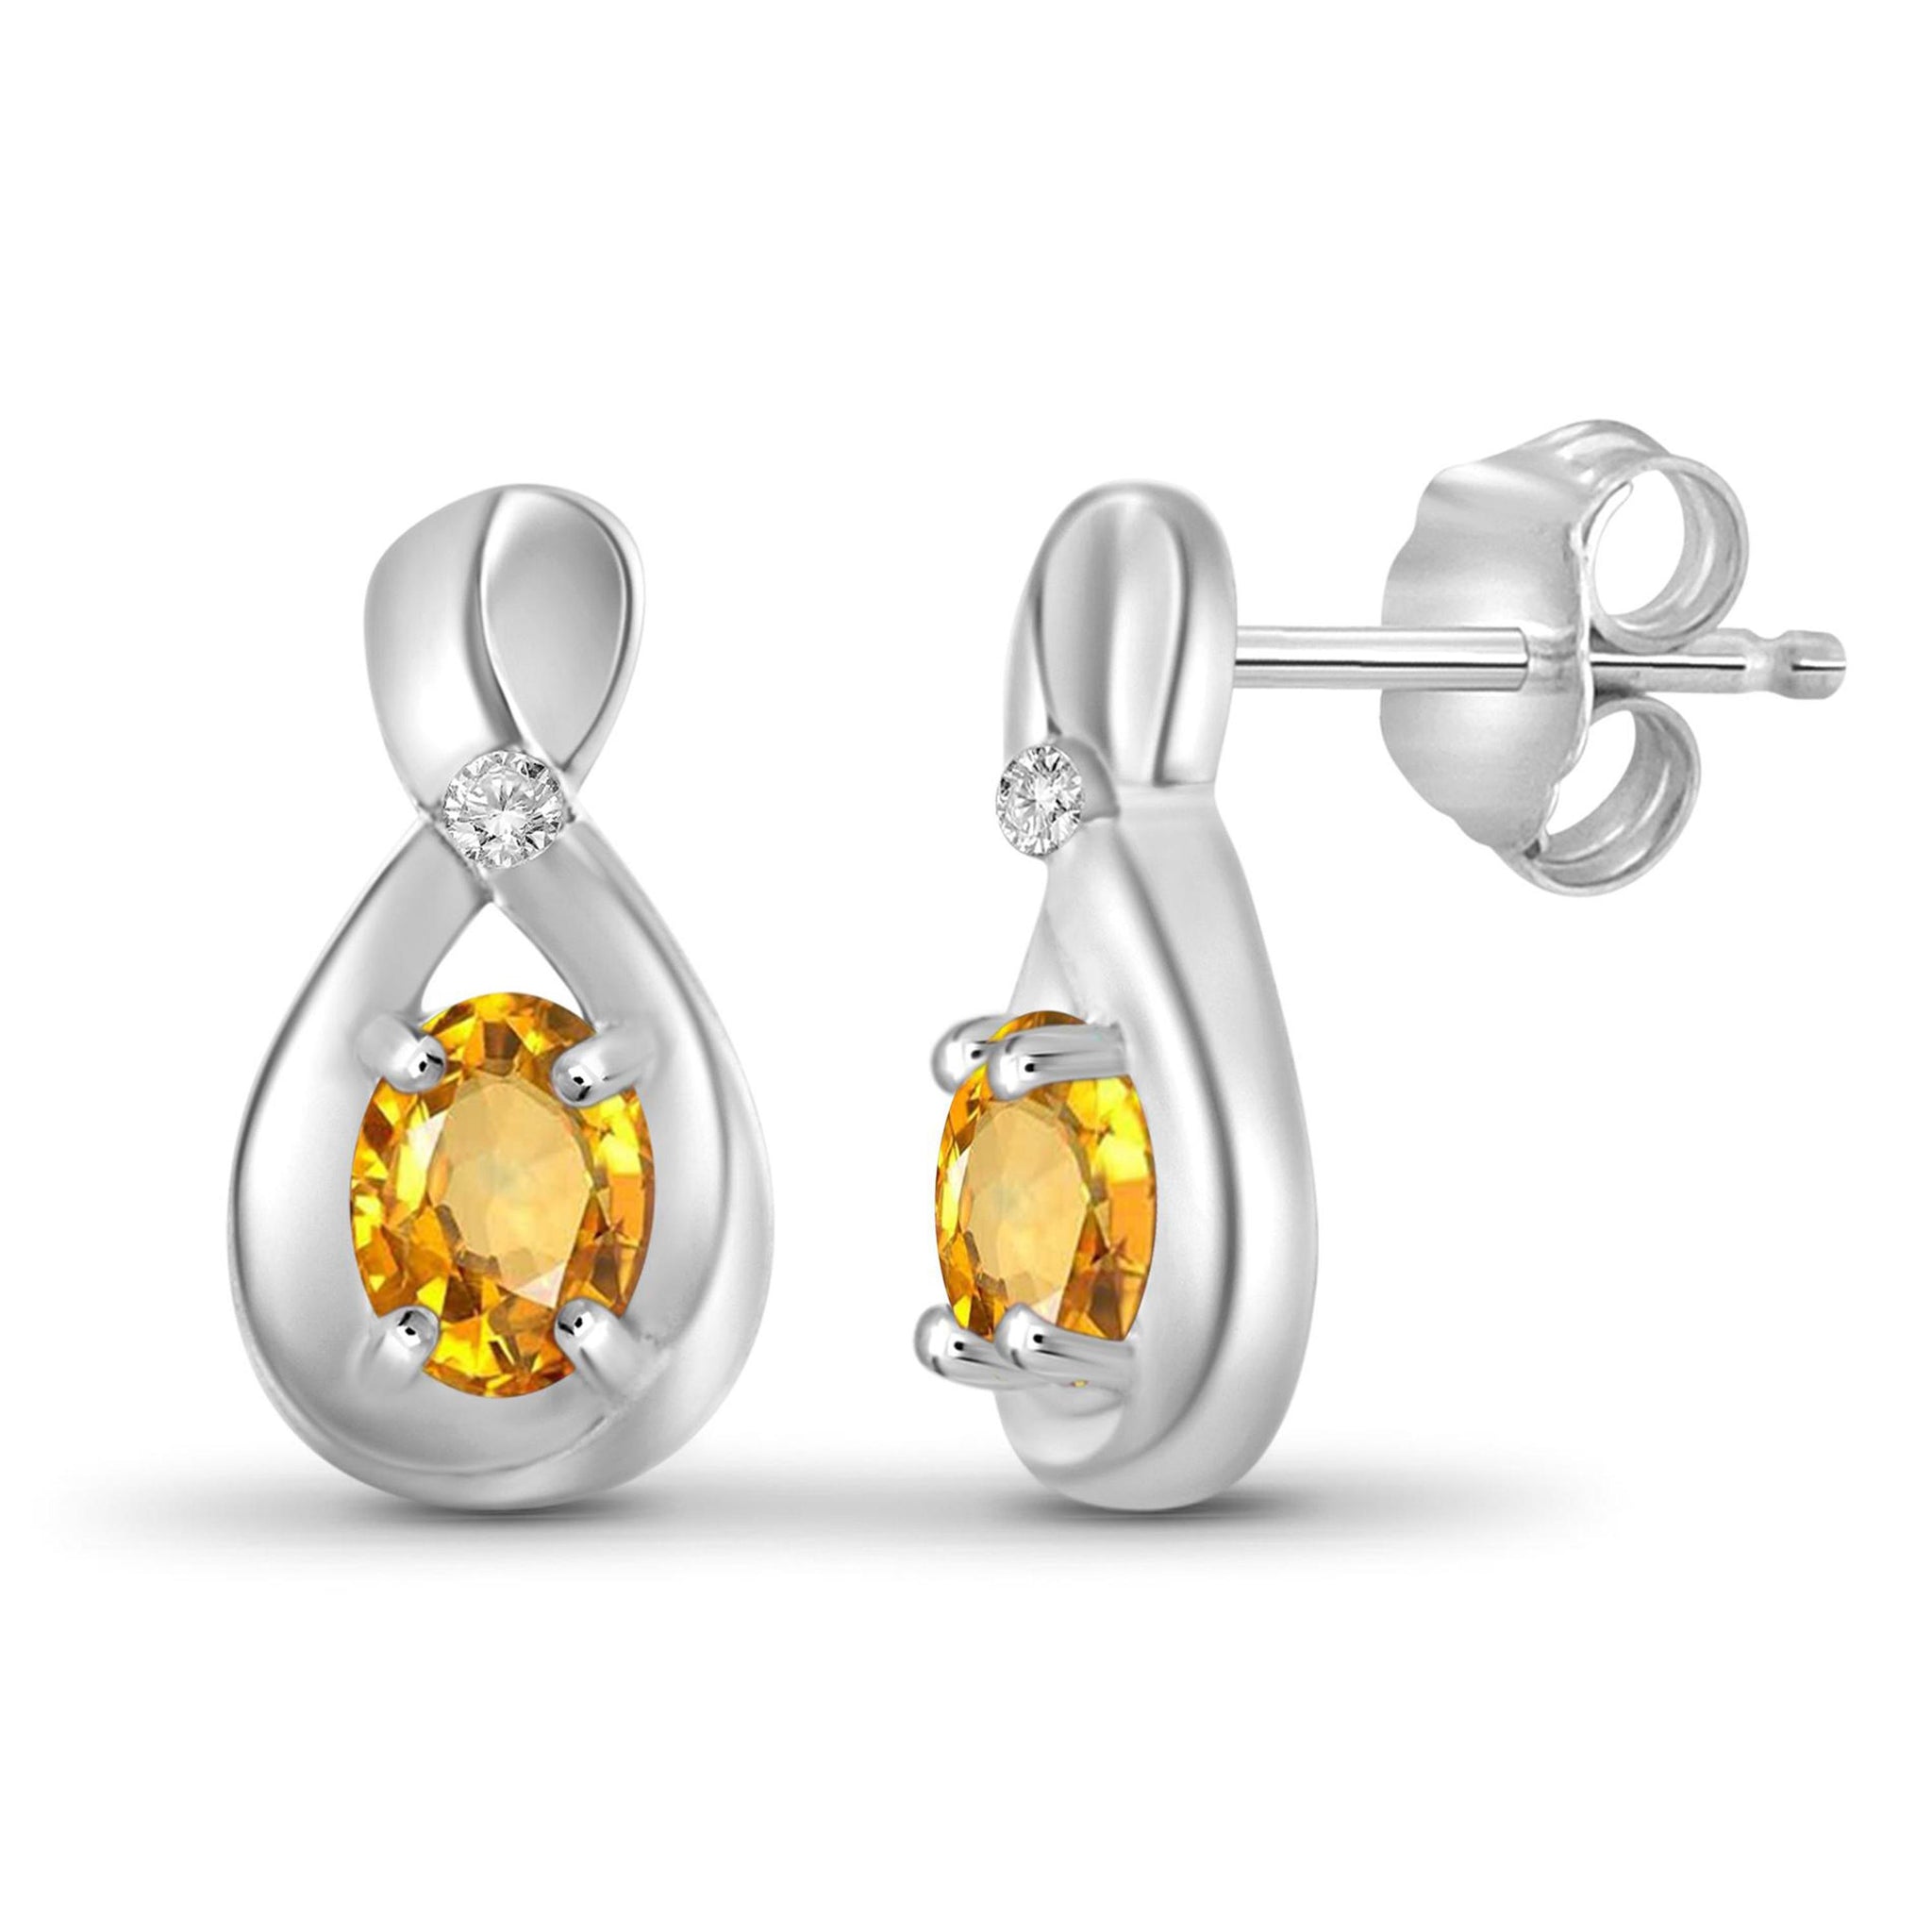 JewelonFire 1/2 Carat T.G.W. Citrine and White Diamond Accent Sterling Silver Earrings - Assorted Colors